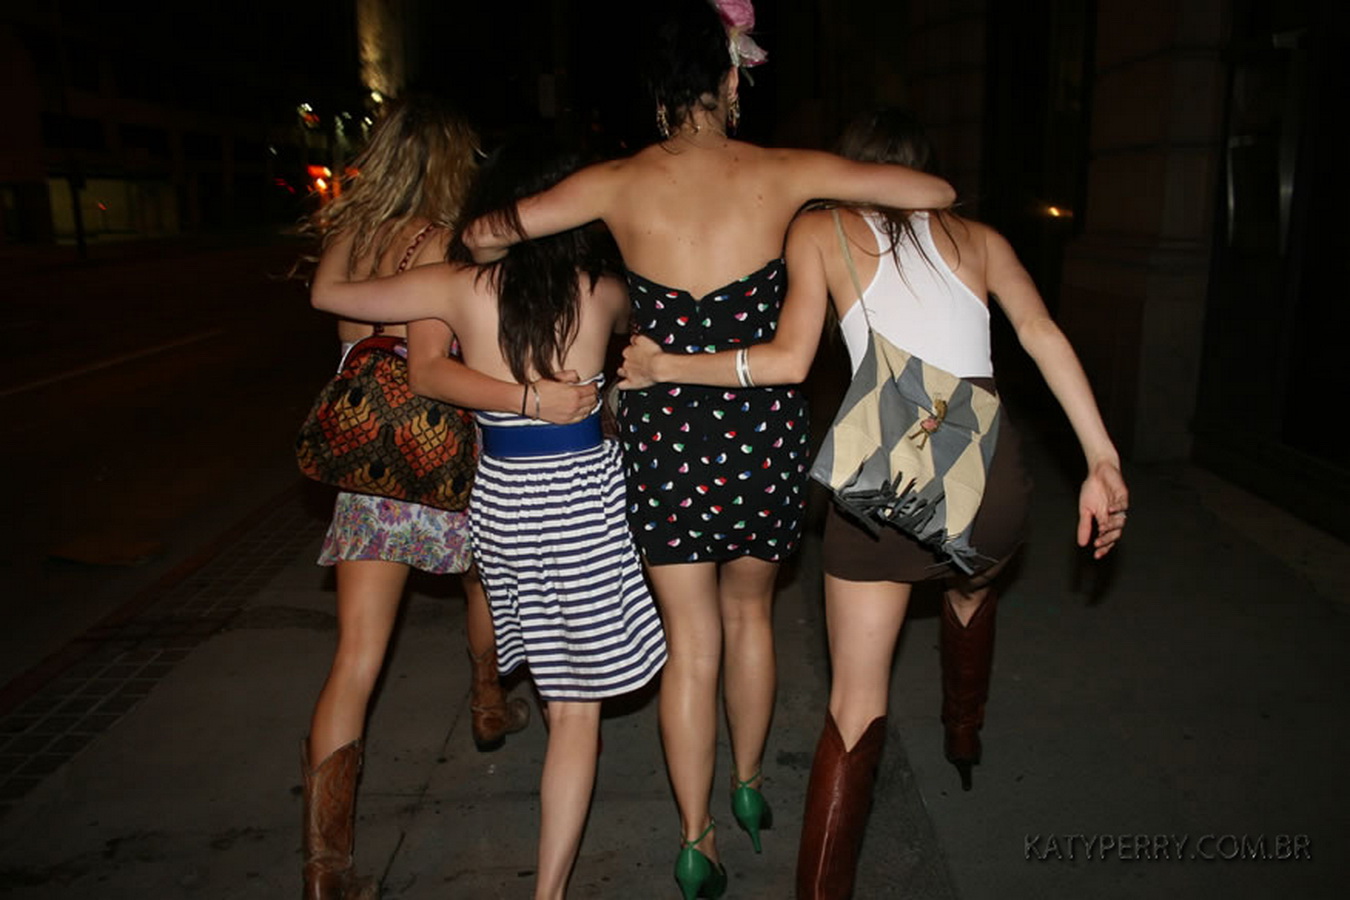 Katy_Perry_bobsslip_drunk_cleavage_downblouse_upskirt_nipslip_at_her_birthday_2007_party_99x_HQ_83.jpg